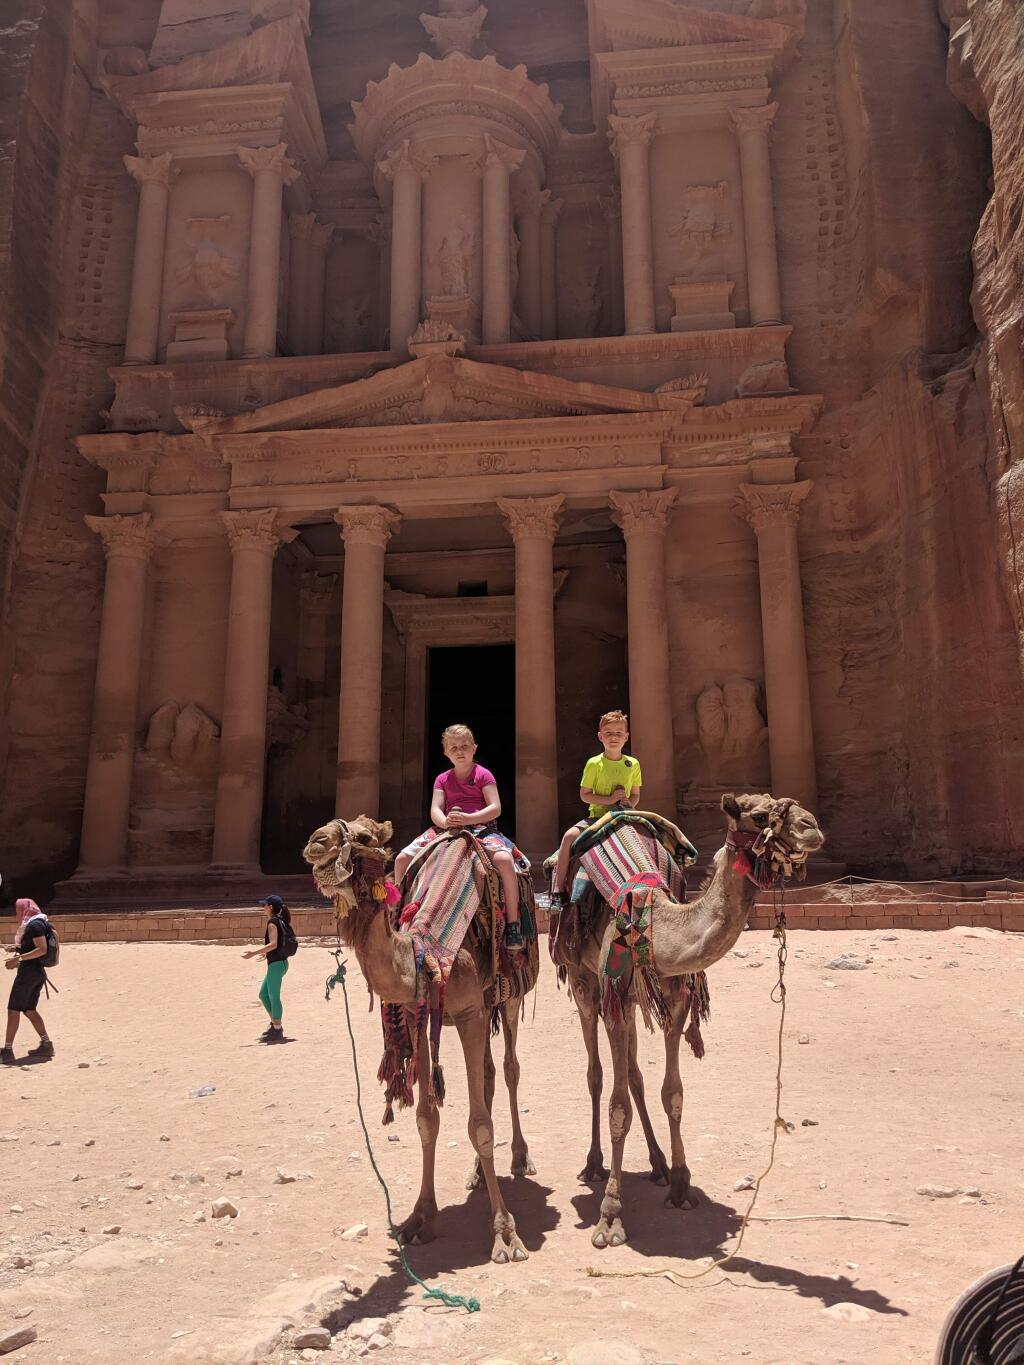 Wilson School student Mara Majerus likes to get recipe inspiration from travel. She is pictured here with her brother in Jordan.